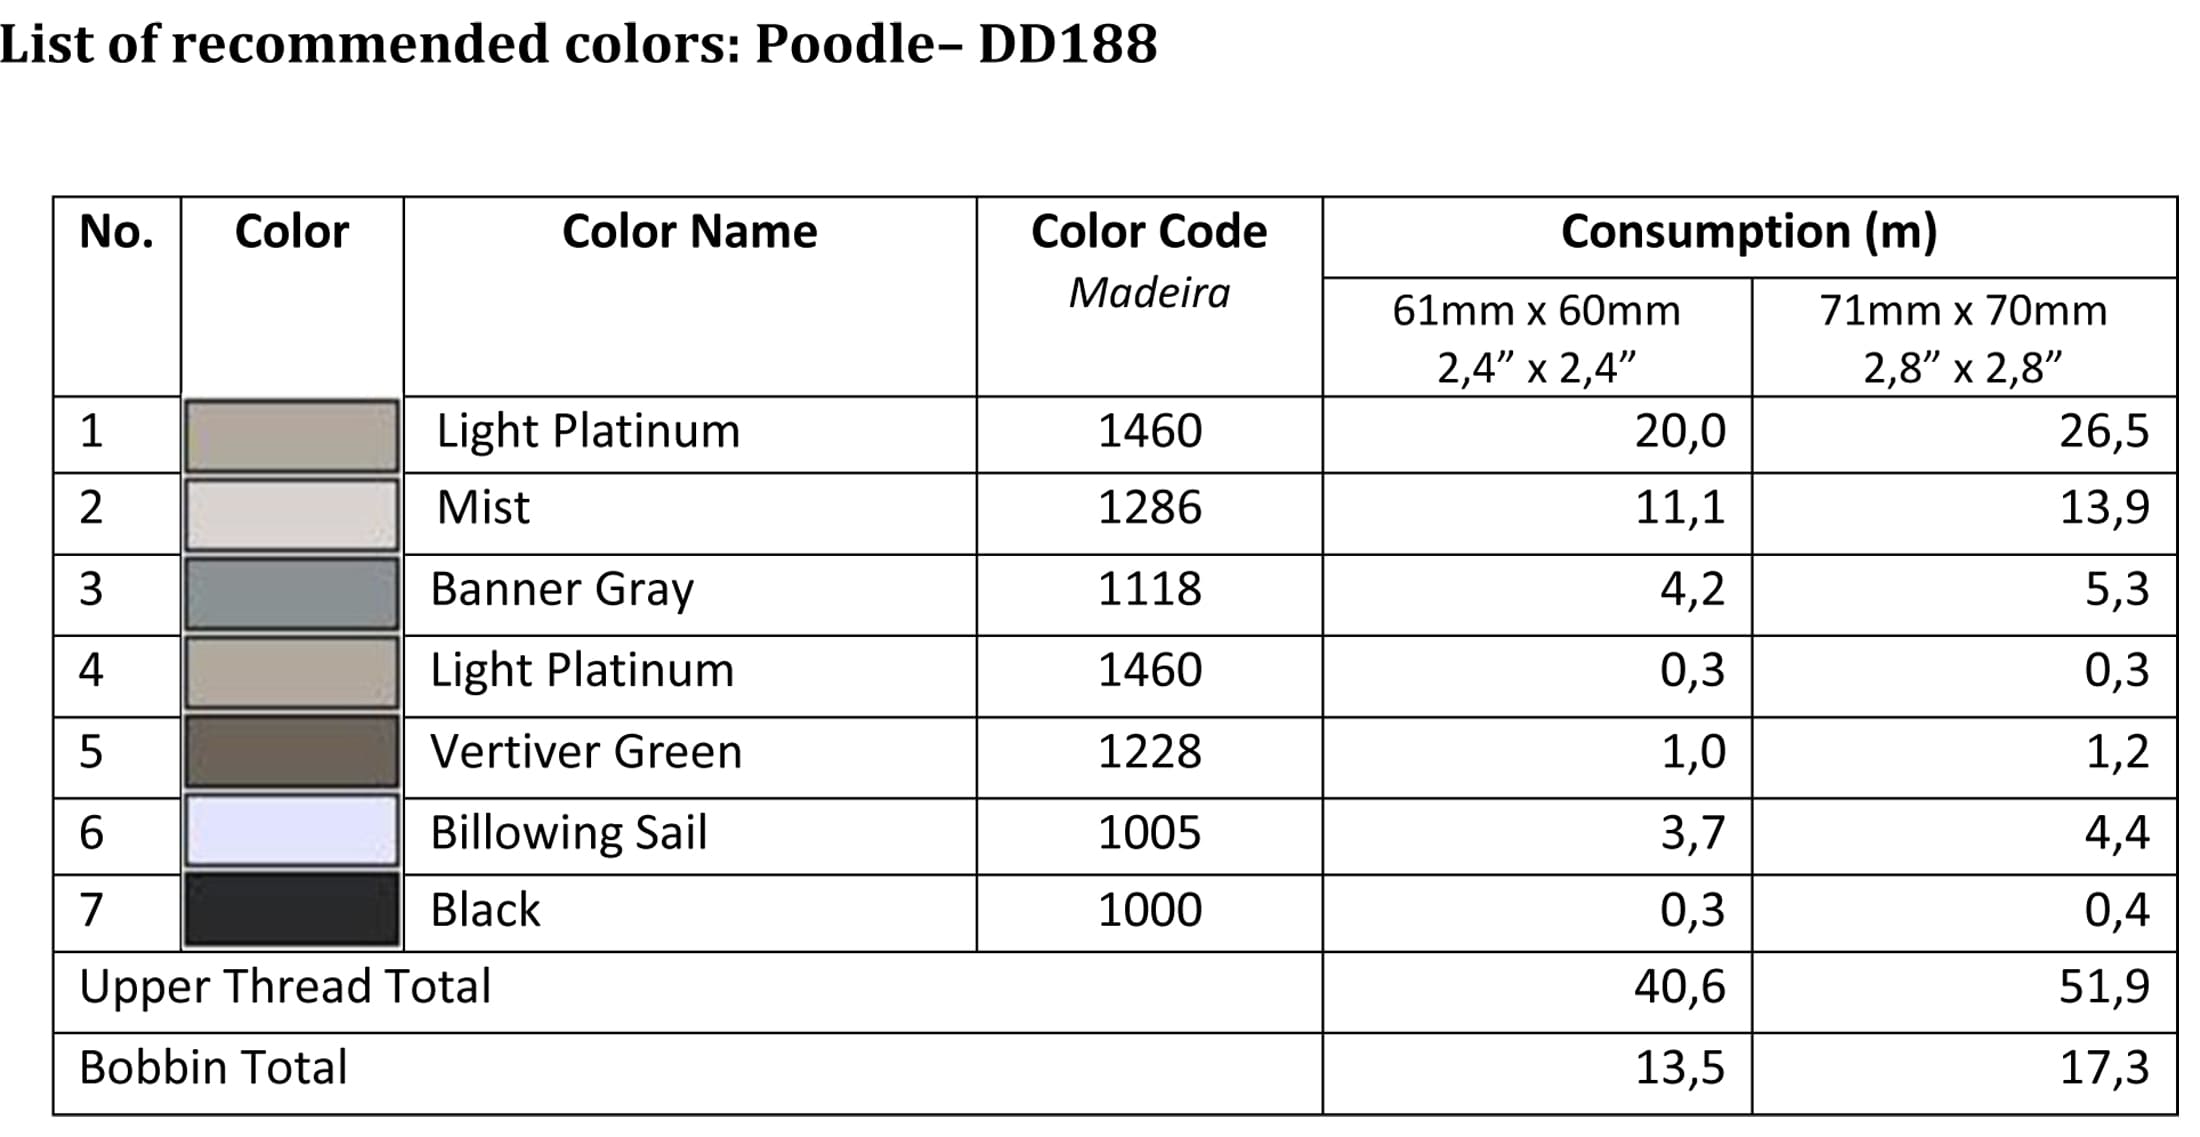 List of recommended colors - DD188